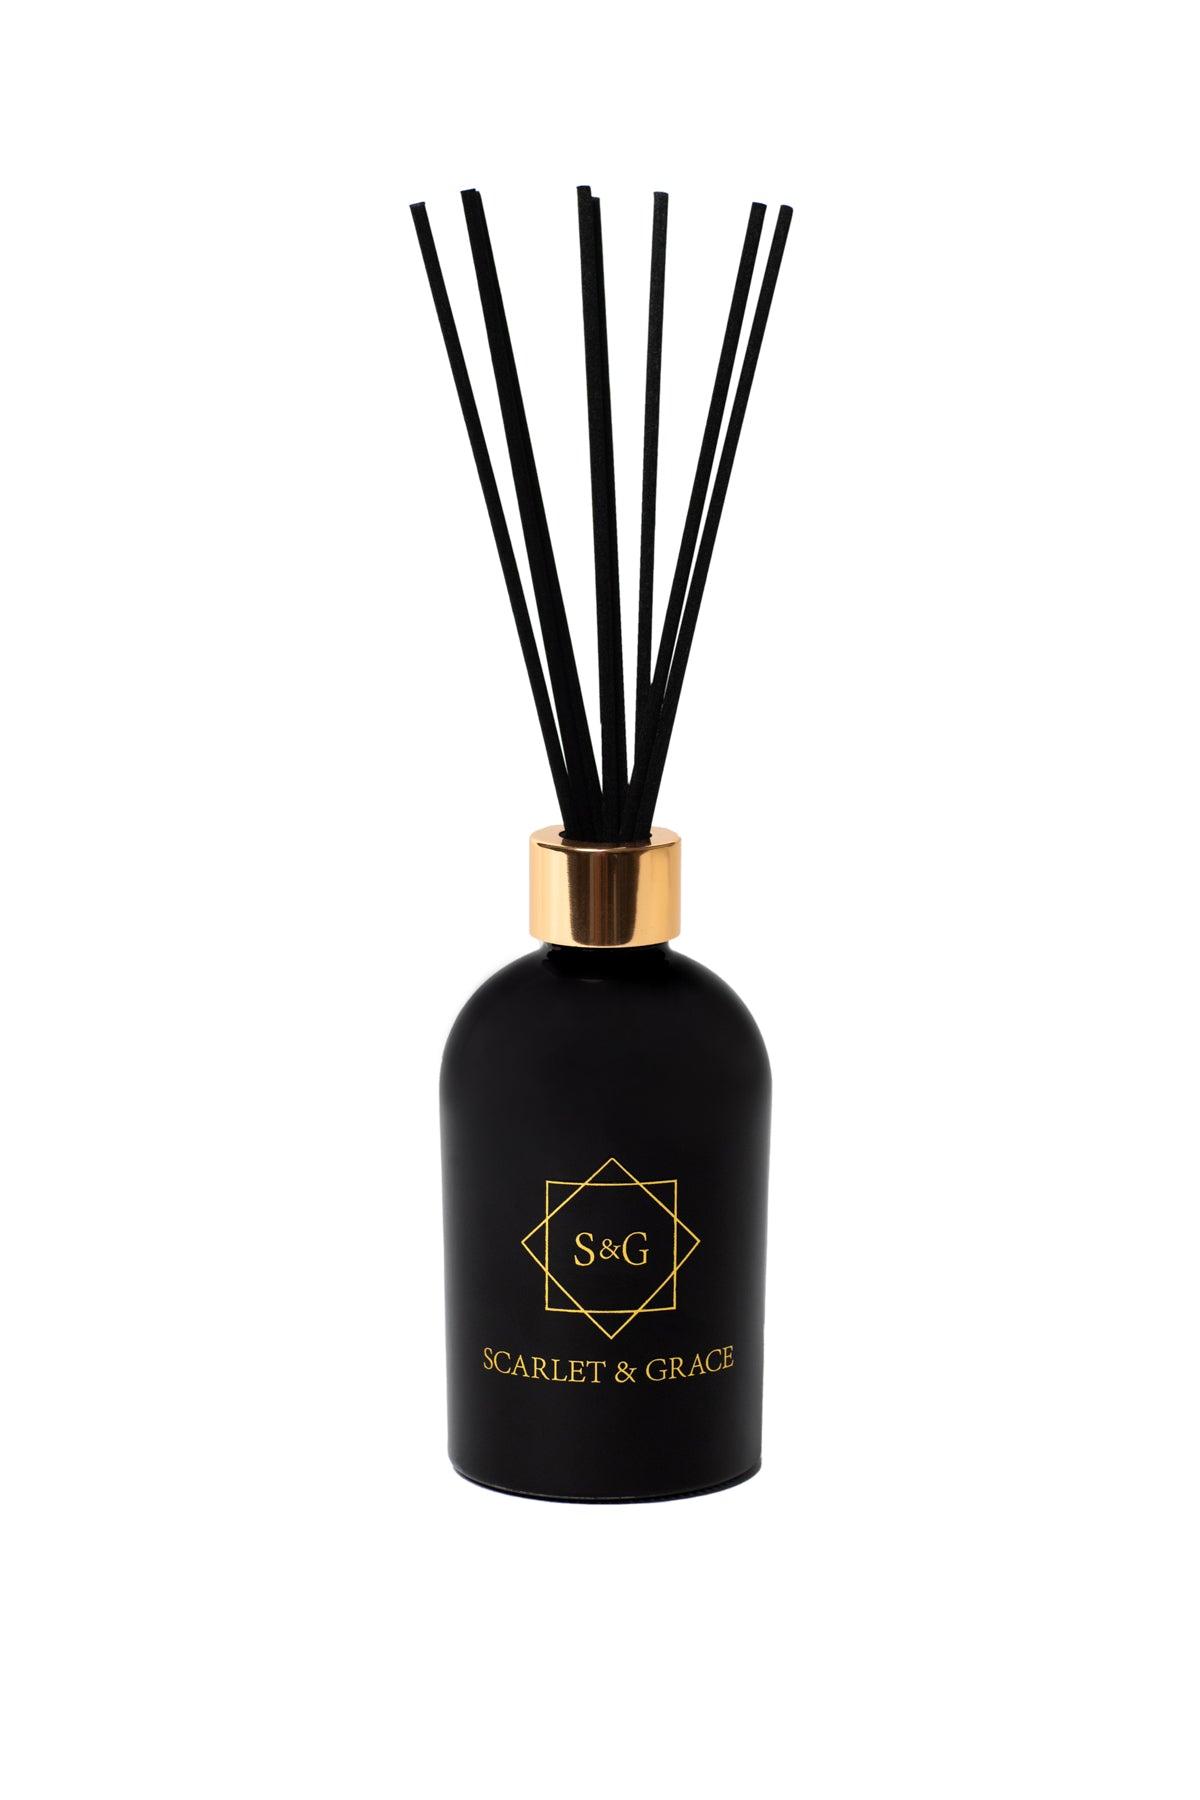 90 Mile Beach - 225ml Reed Diffuser - Scarlet & Grace